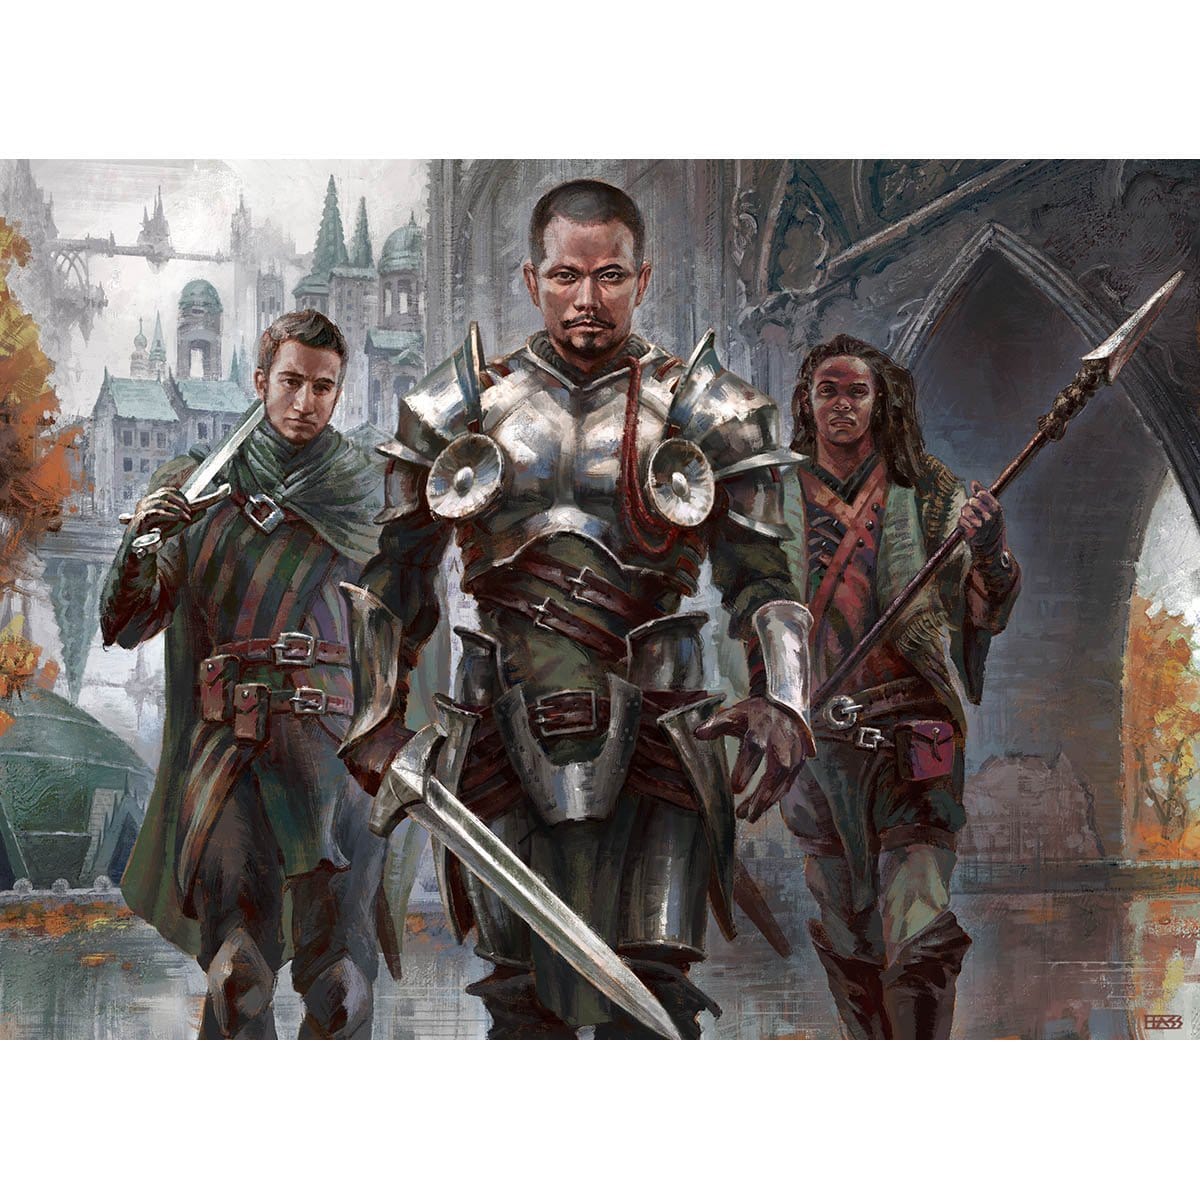 Haazda Marshal Print - Print - Original Magic Art - Accessories for Magic the Gathering and other card games